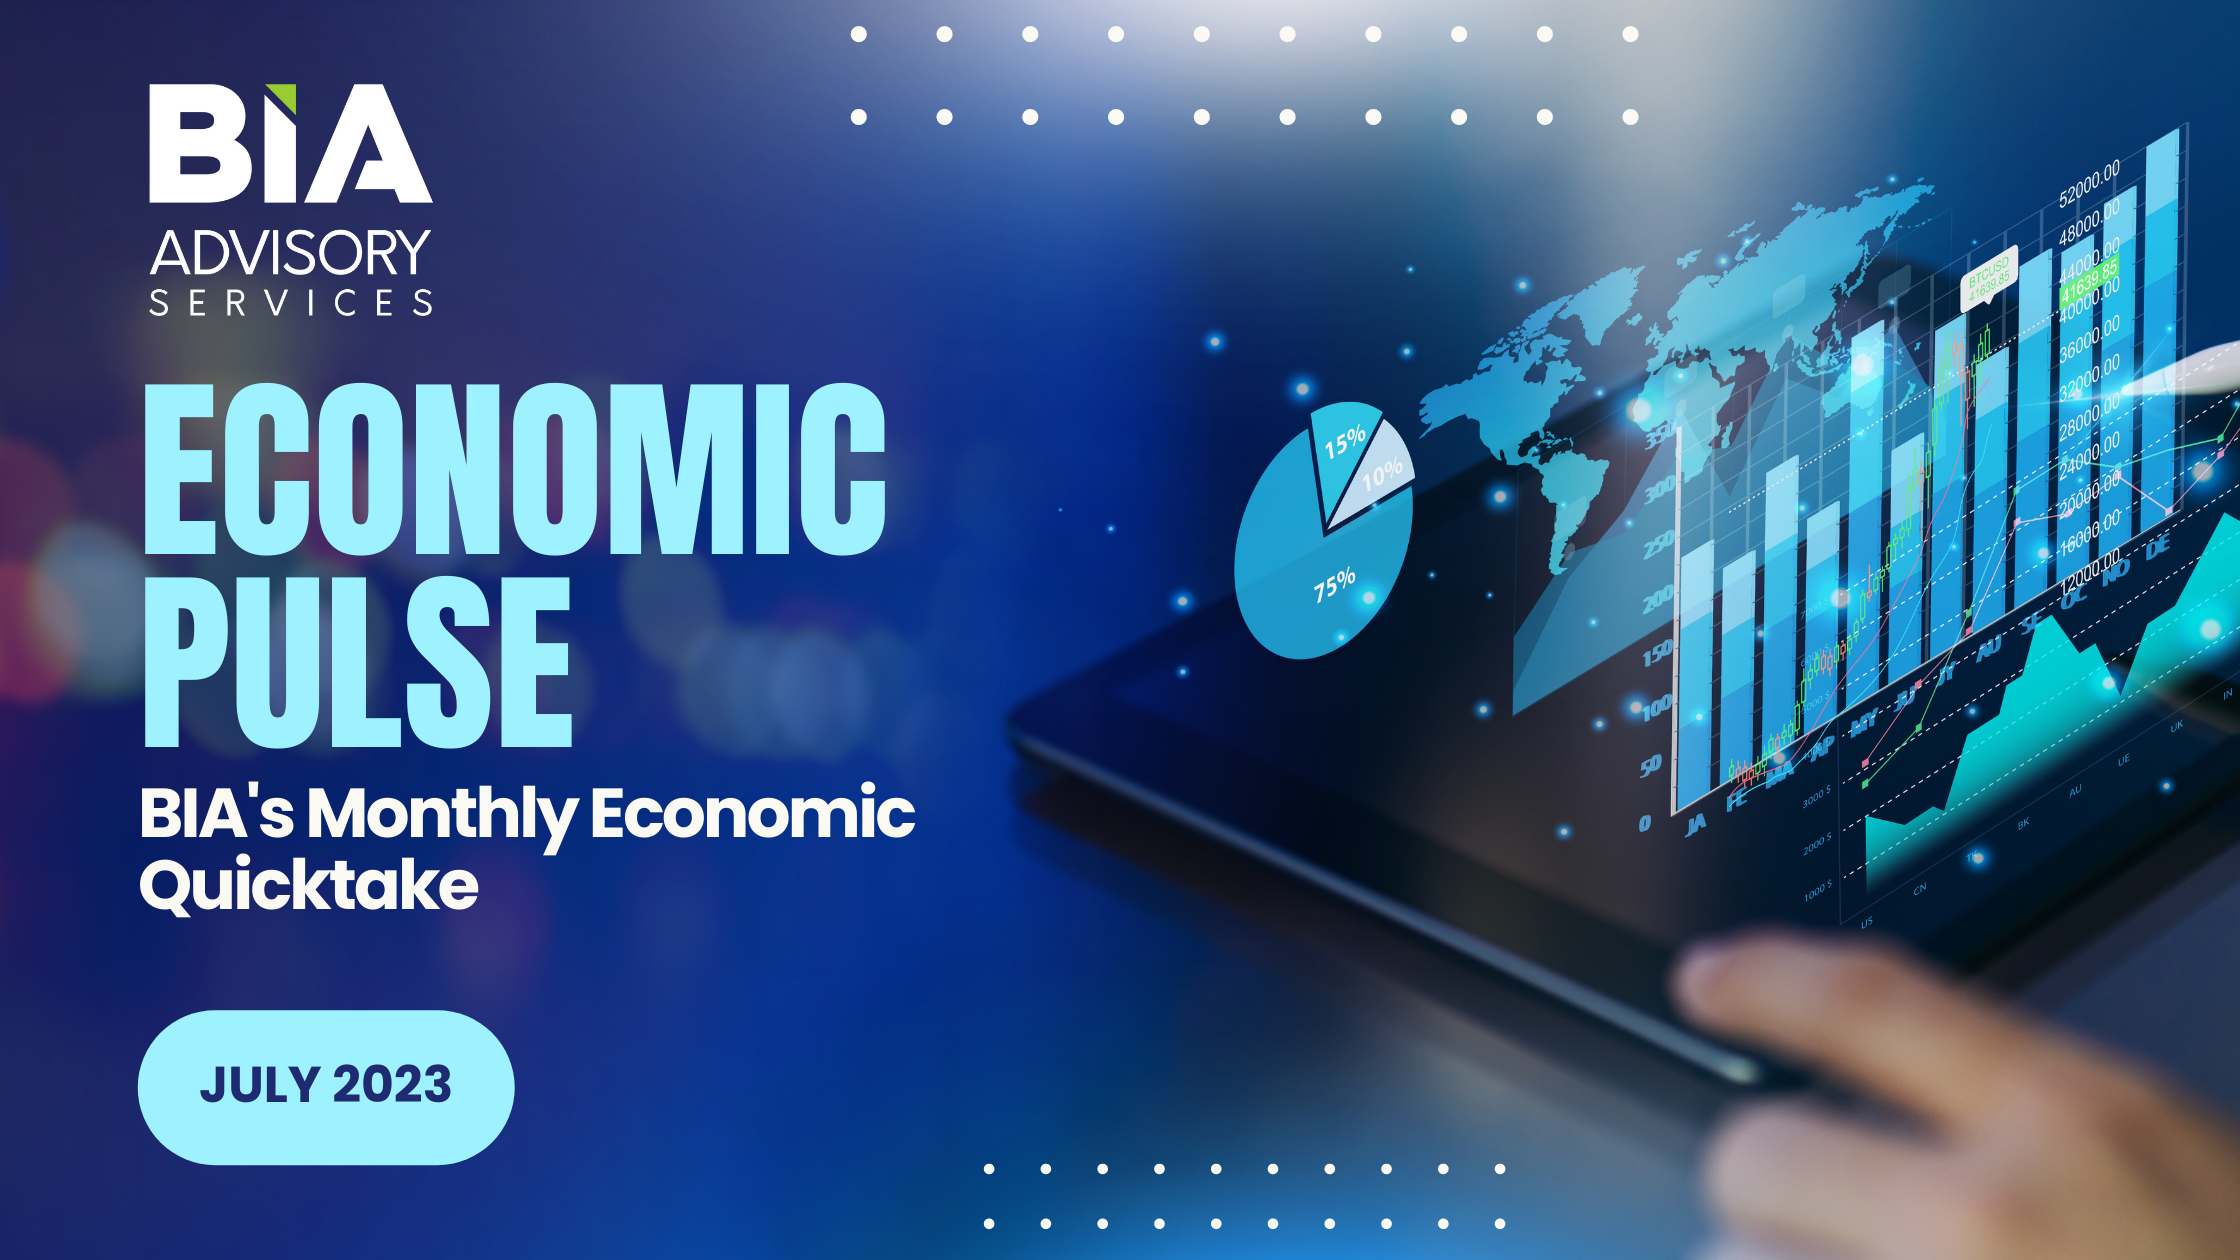 Economic Pulse: BIA’s Monthly Quick Take For July 2023